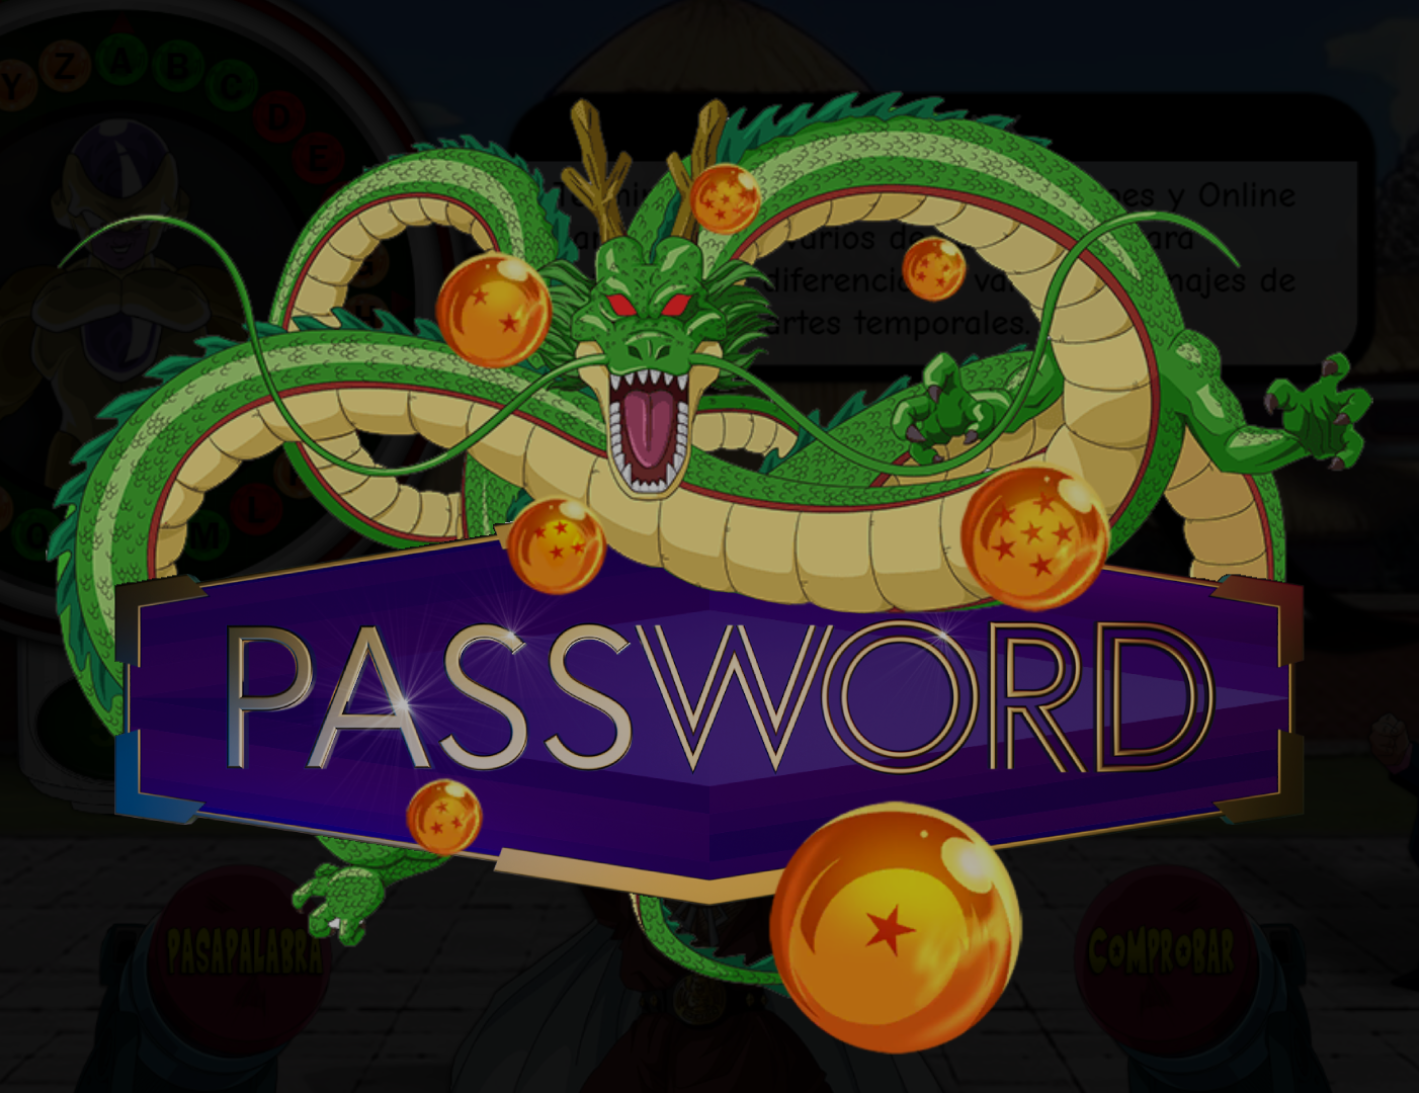 Cover with the PassWord logo and the game in the background.